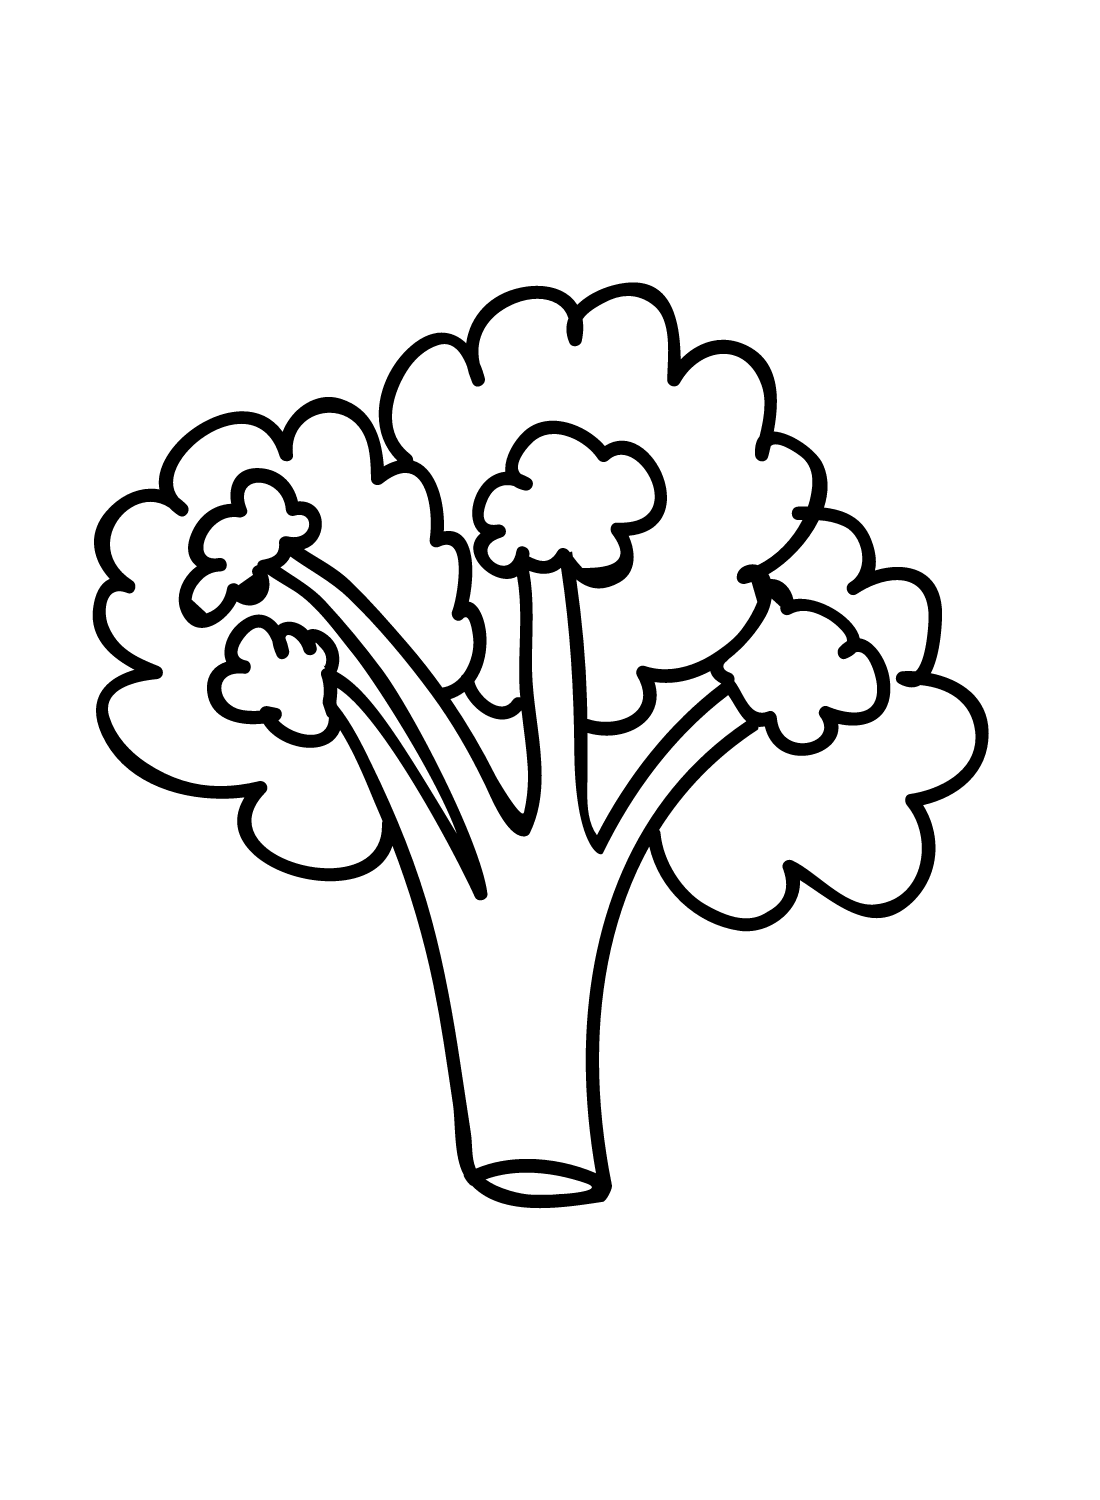 Free Broccoli Coloring Pages